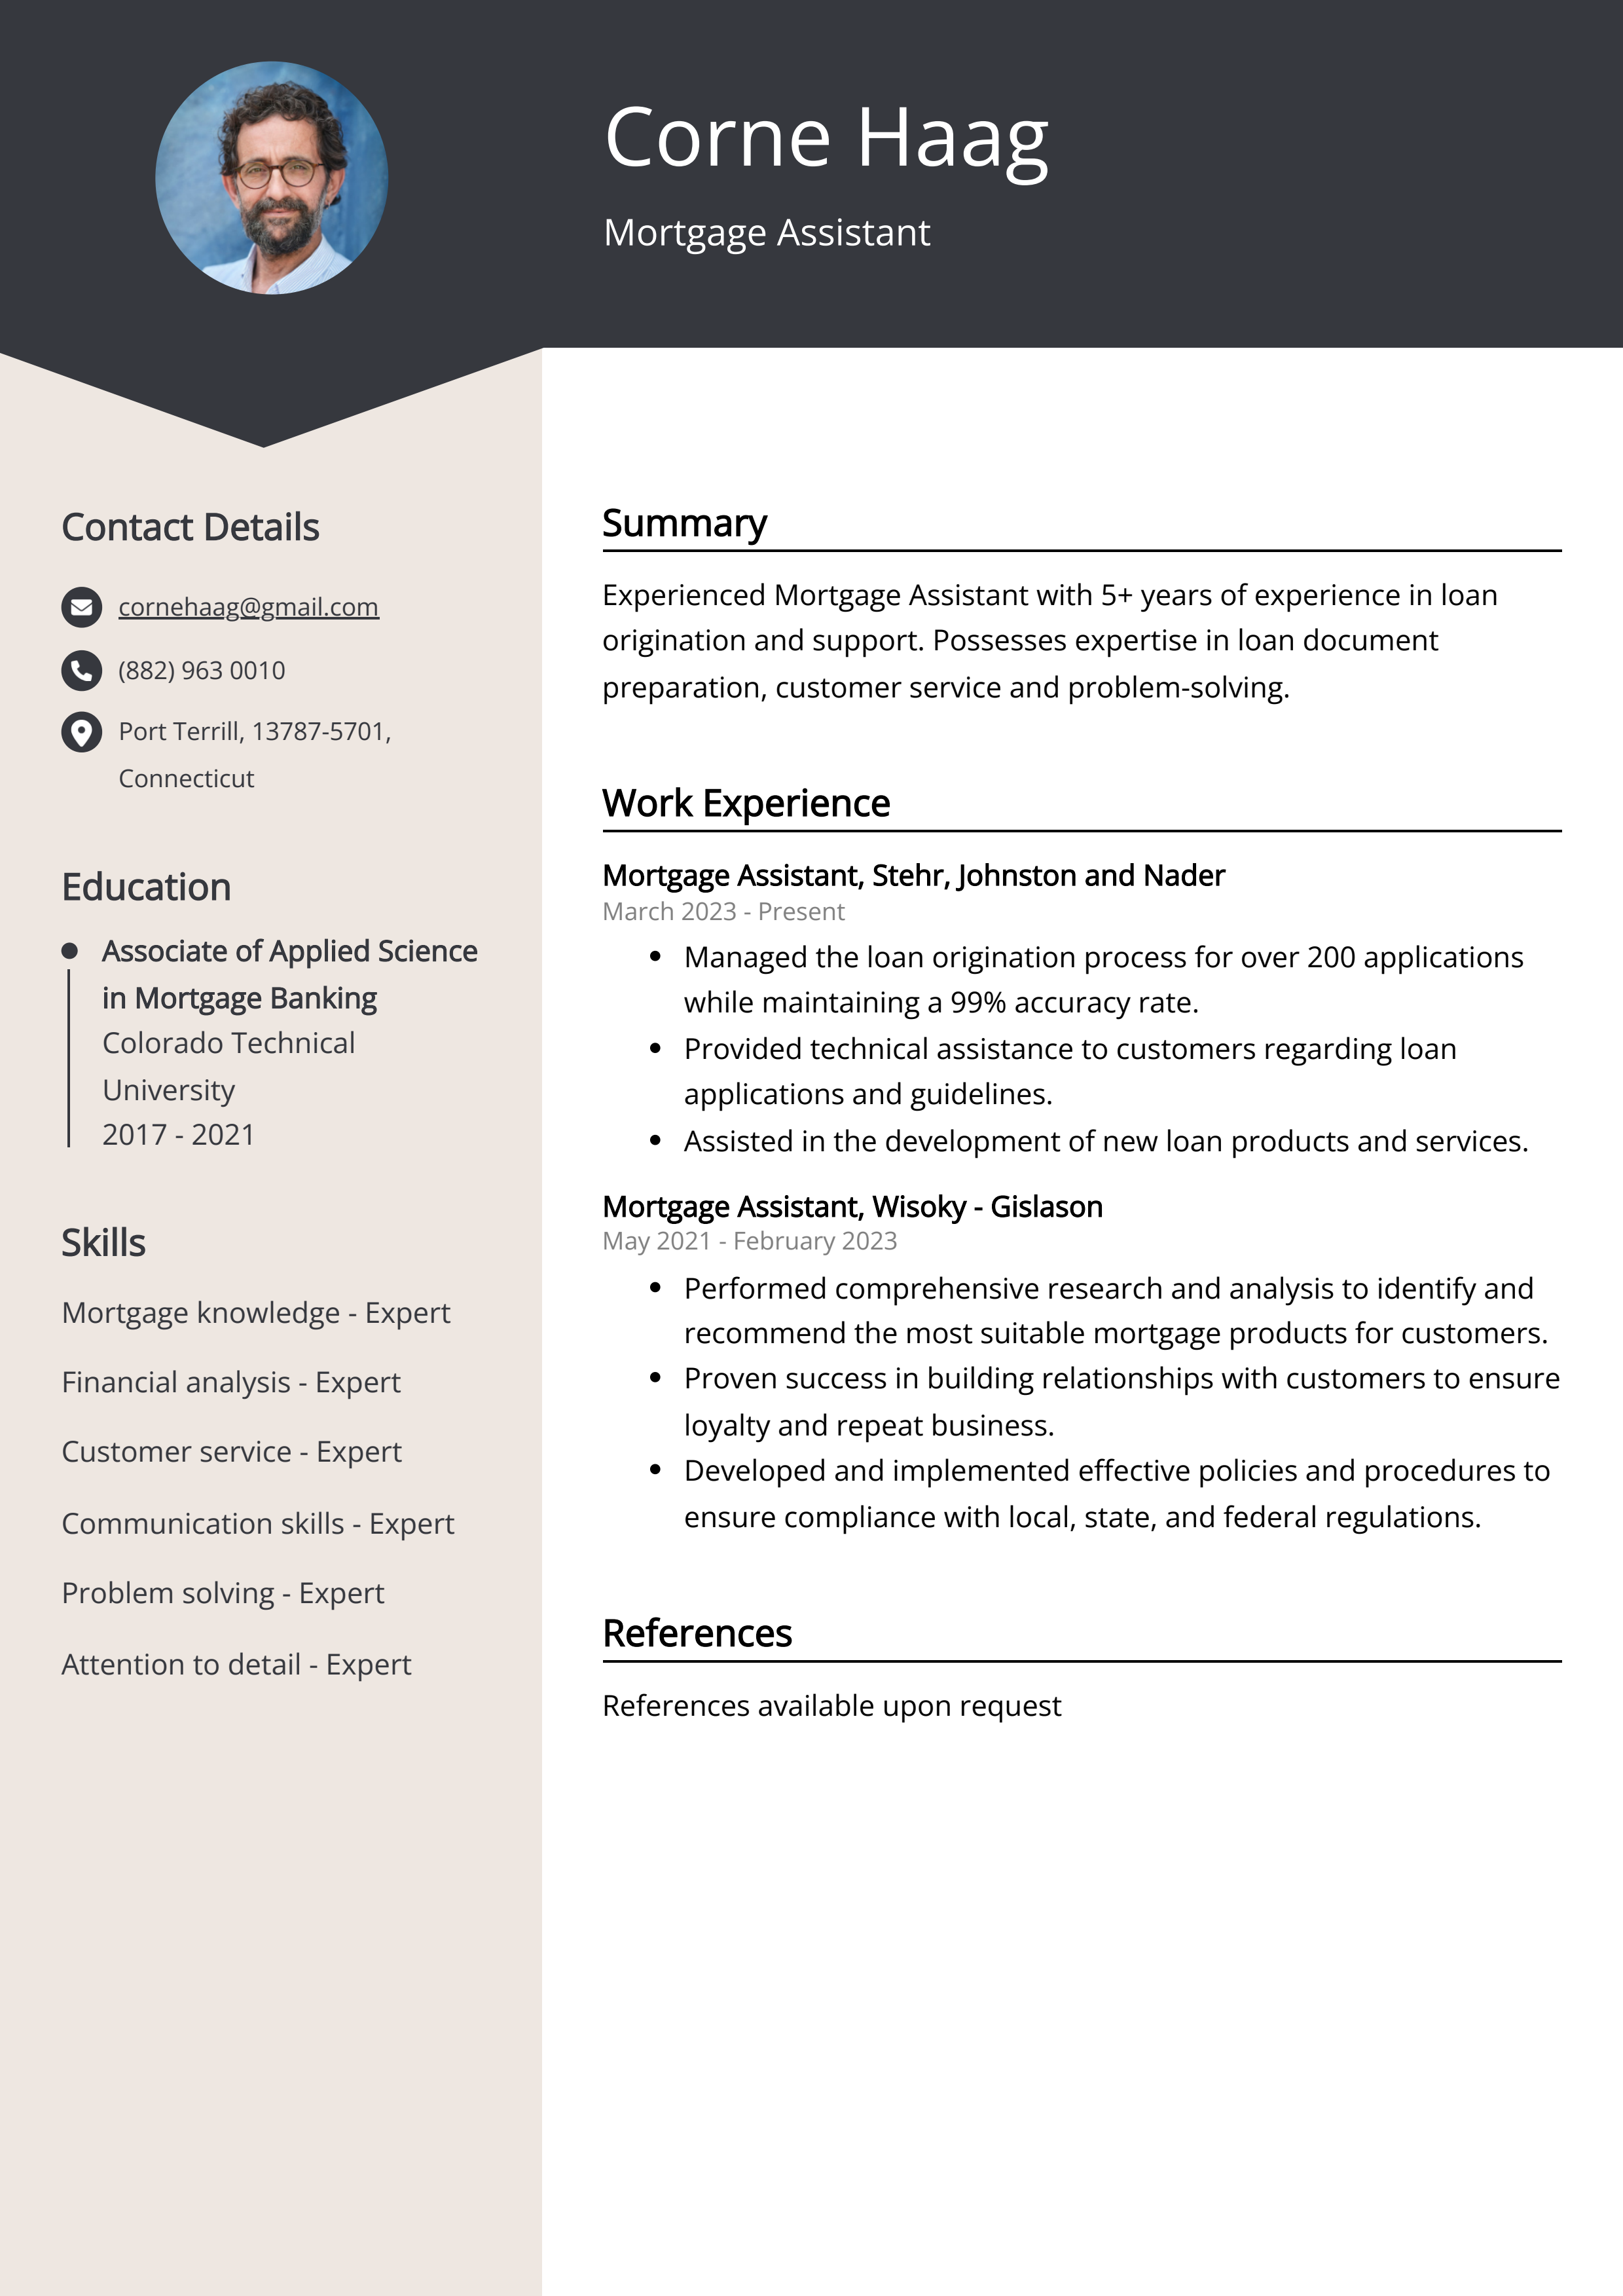 Mortgage Assistant CV Example